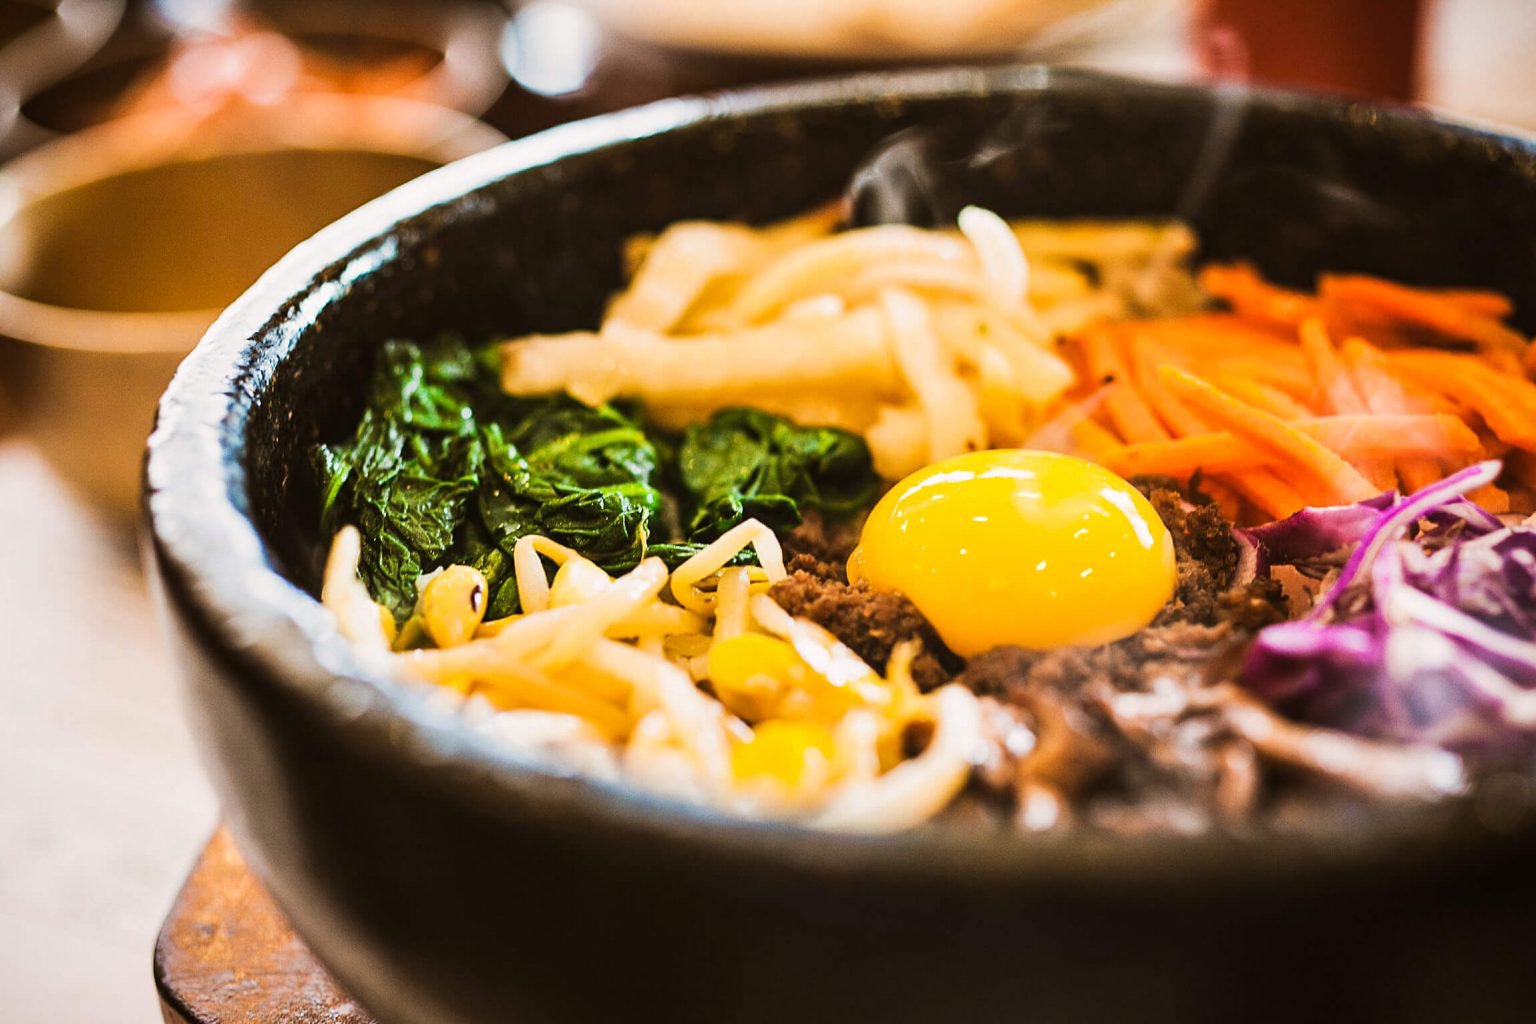 A dolsot bowl filled with bibimbap, a layer of rice topped with meats, veggies and an over-easy egg.